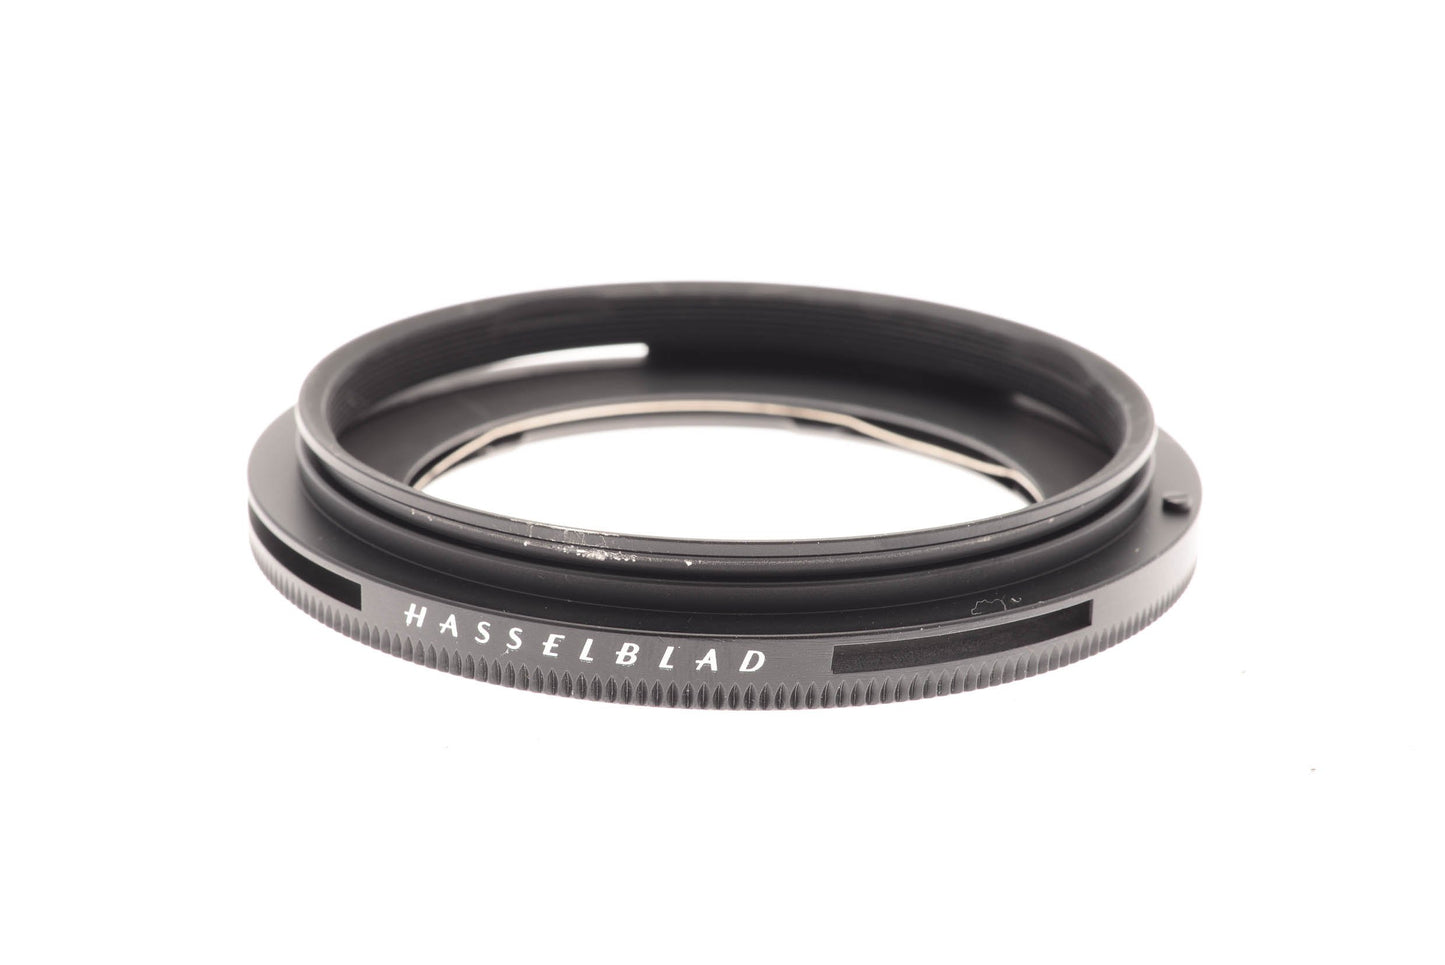 Hasselblad Lens Mounting Ring B50 (40679) - Accessory